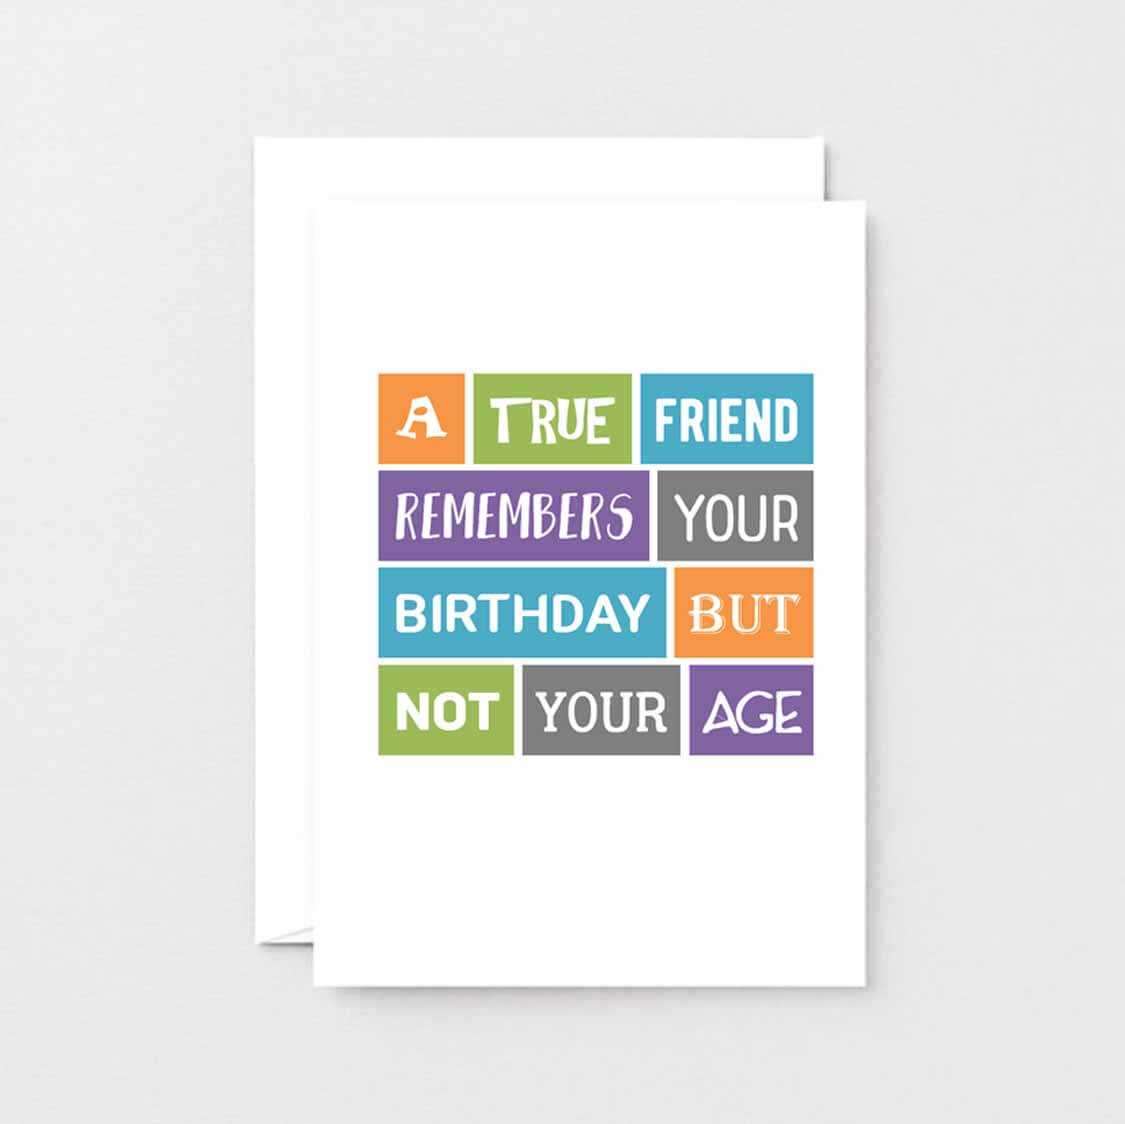 True Friend Birthday Card by SixElevenCreations. Reads A true friend remembers your birthday but not your age. Product code SE0020A6